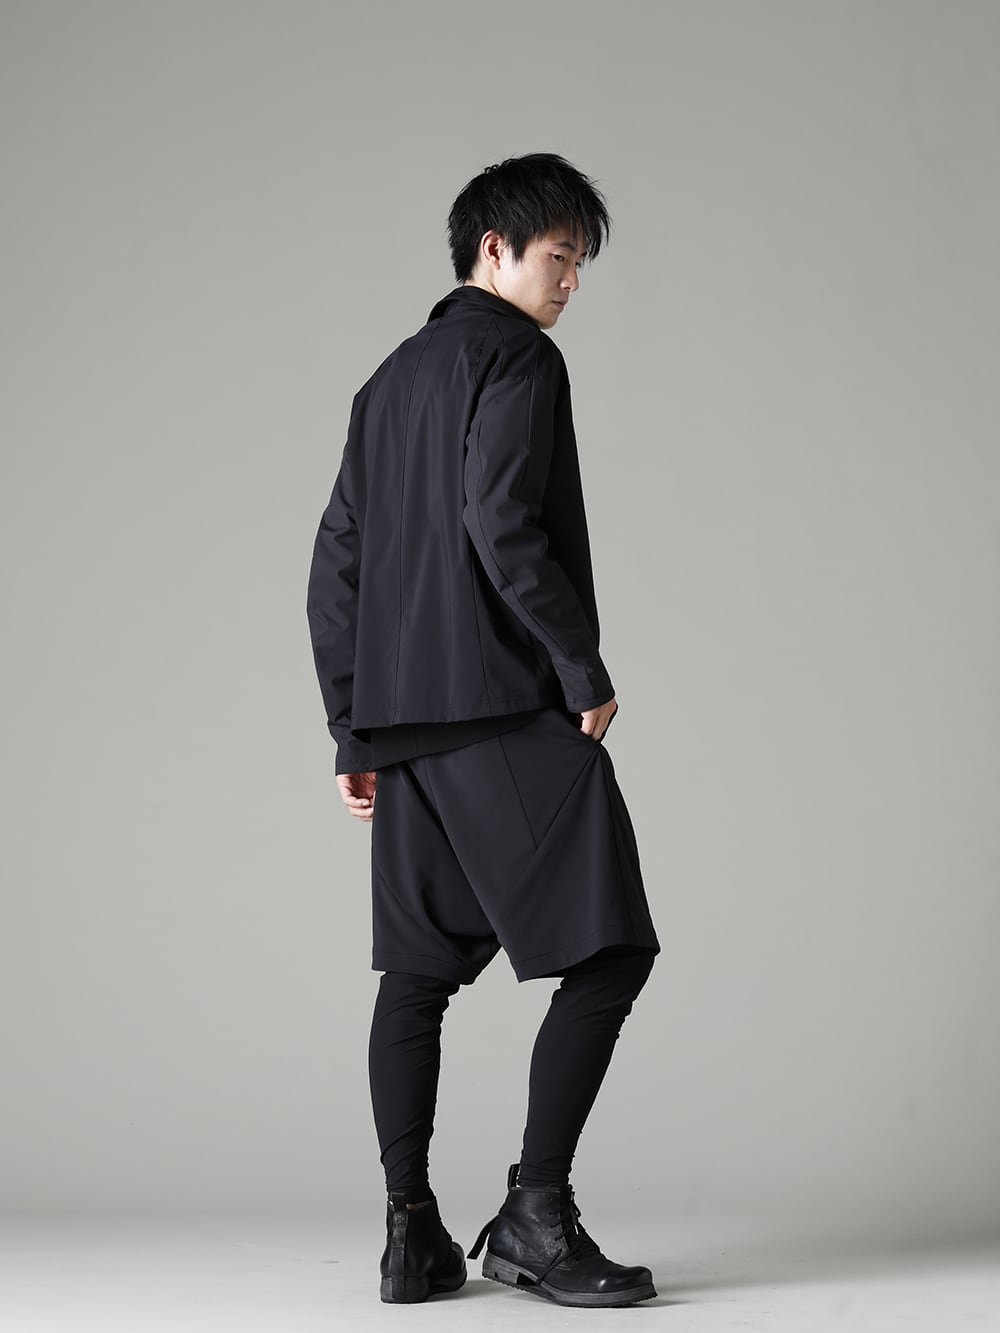 DEVOA EXIST 22-23AW - BLOG Skin” ”Layered Dry Pants Stretch FASCINATE